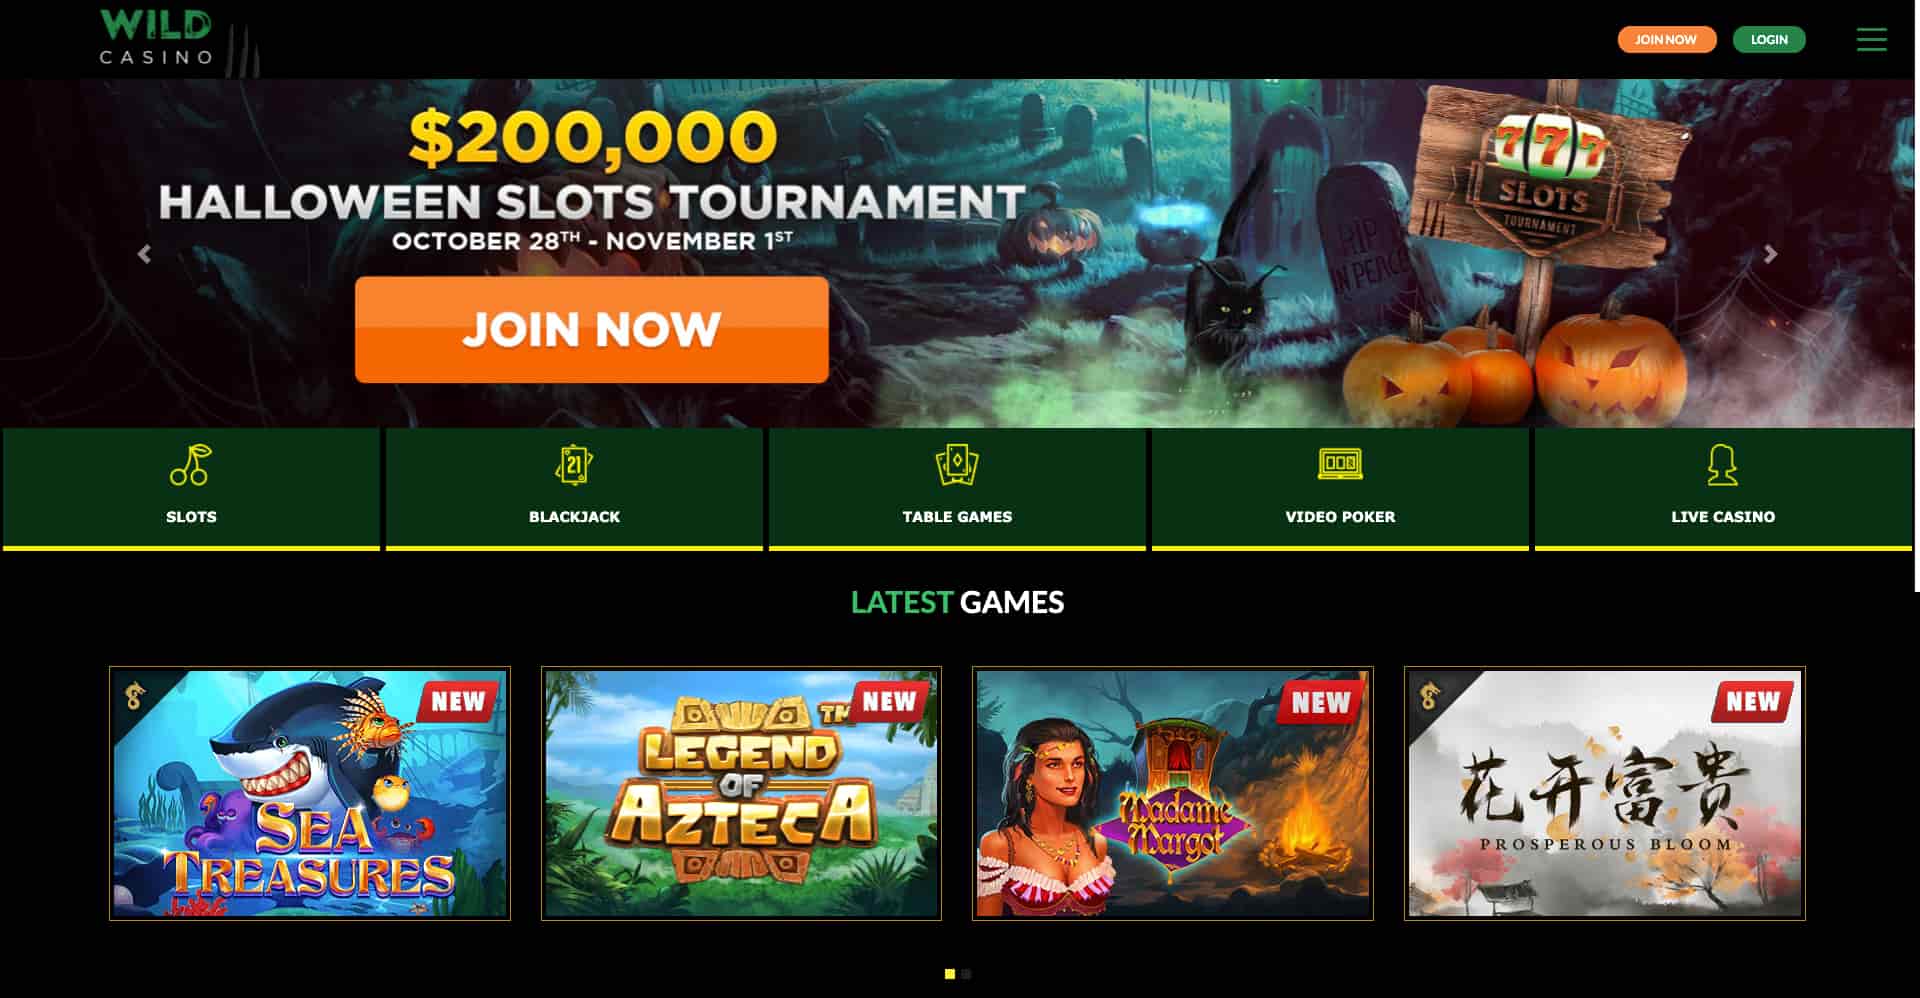 Don't Waste Time! 5 Facts To Start best online casino games to win money